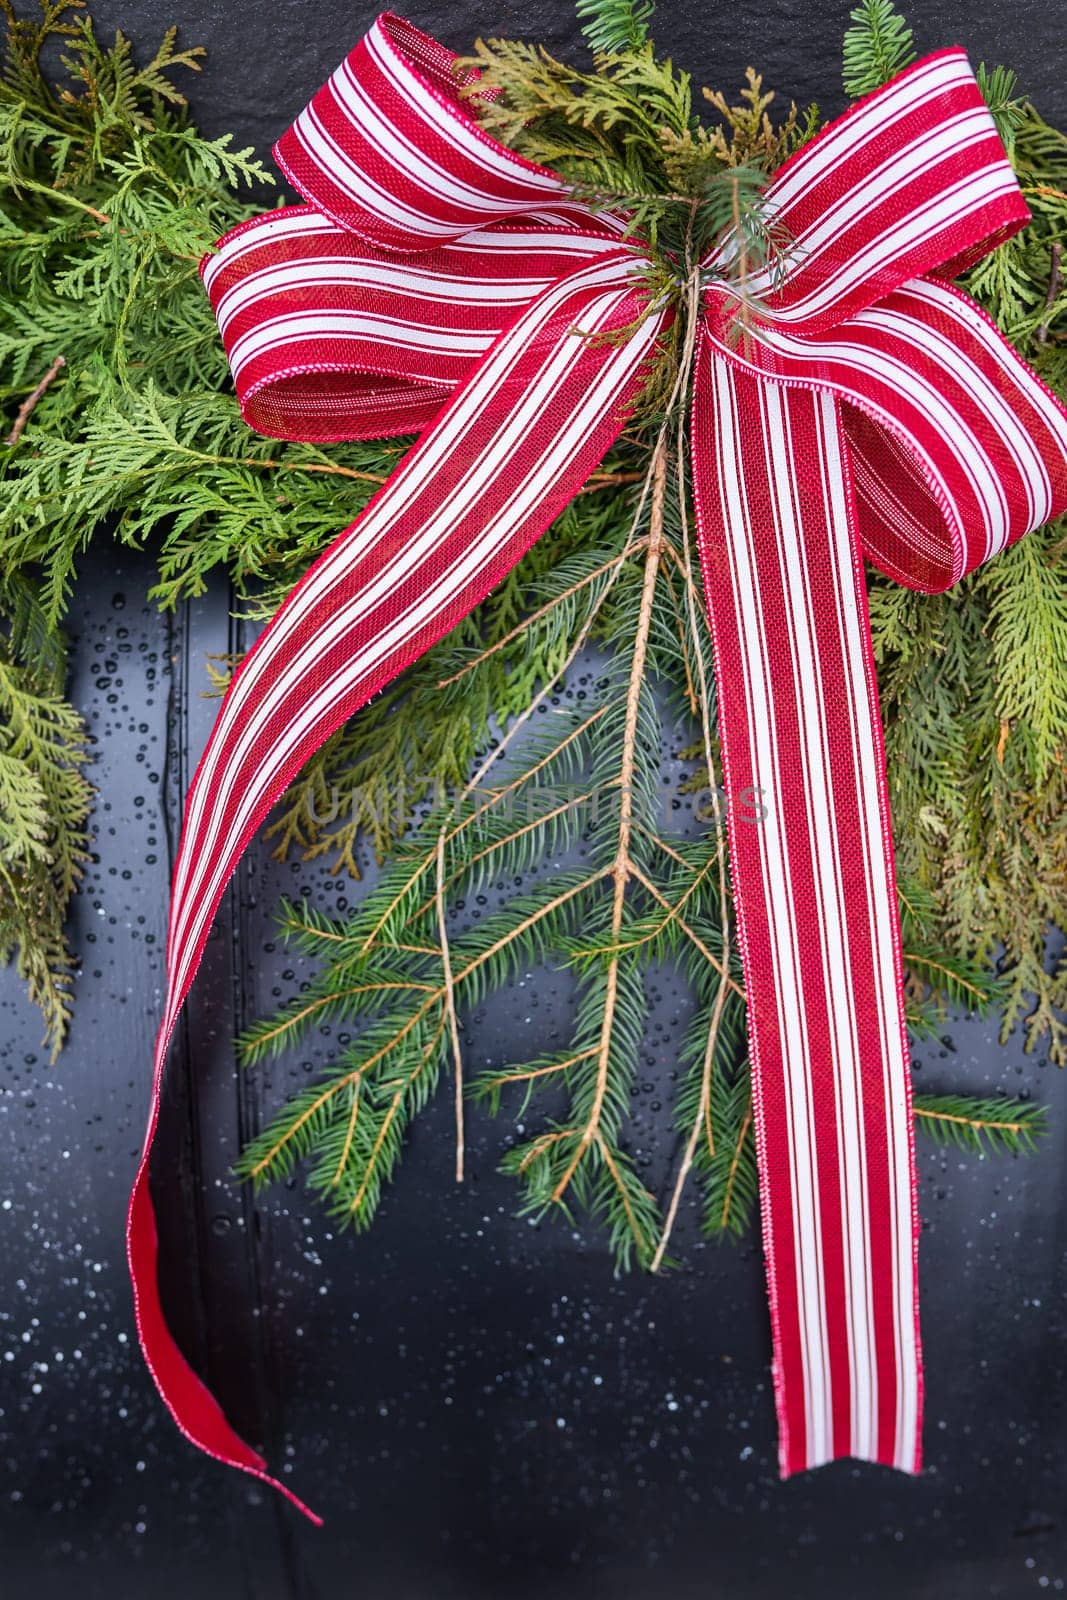 Red and white striped ribbon tied in a bow on a black background with greenery. Festive decoration on the street. by sfinks